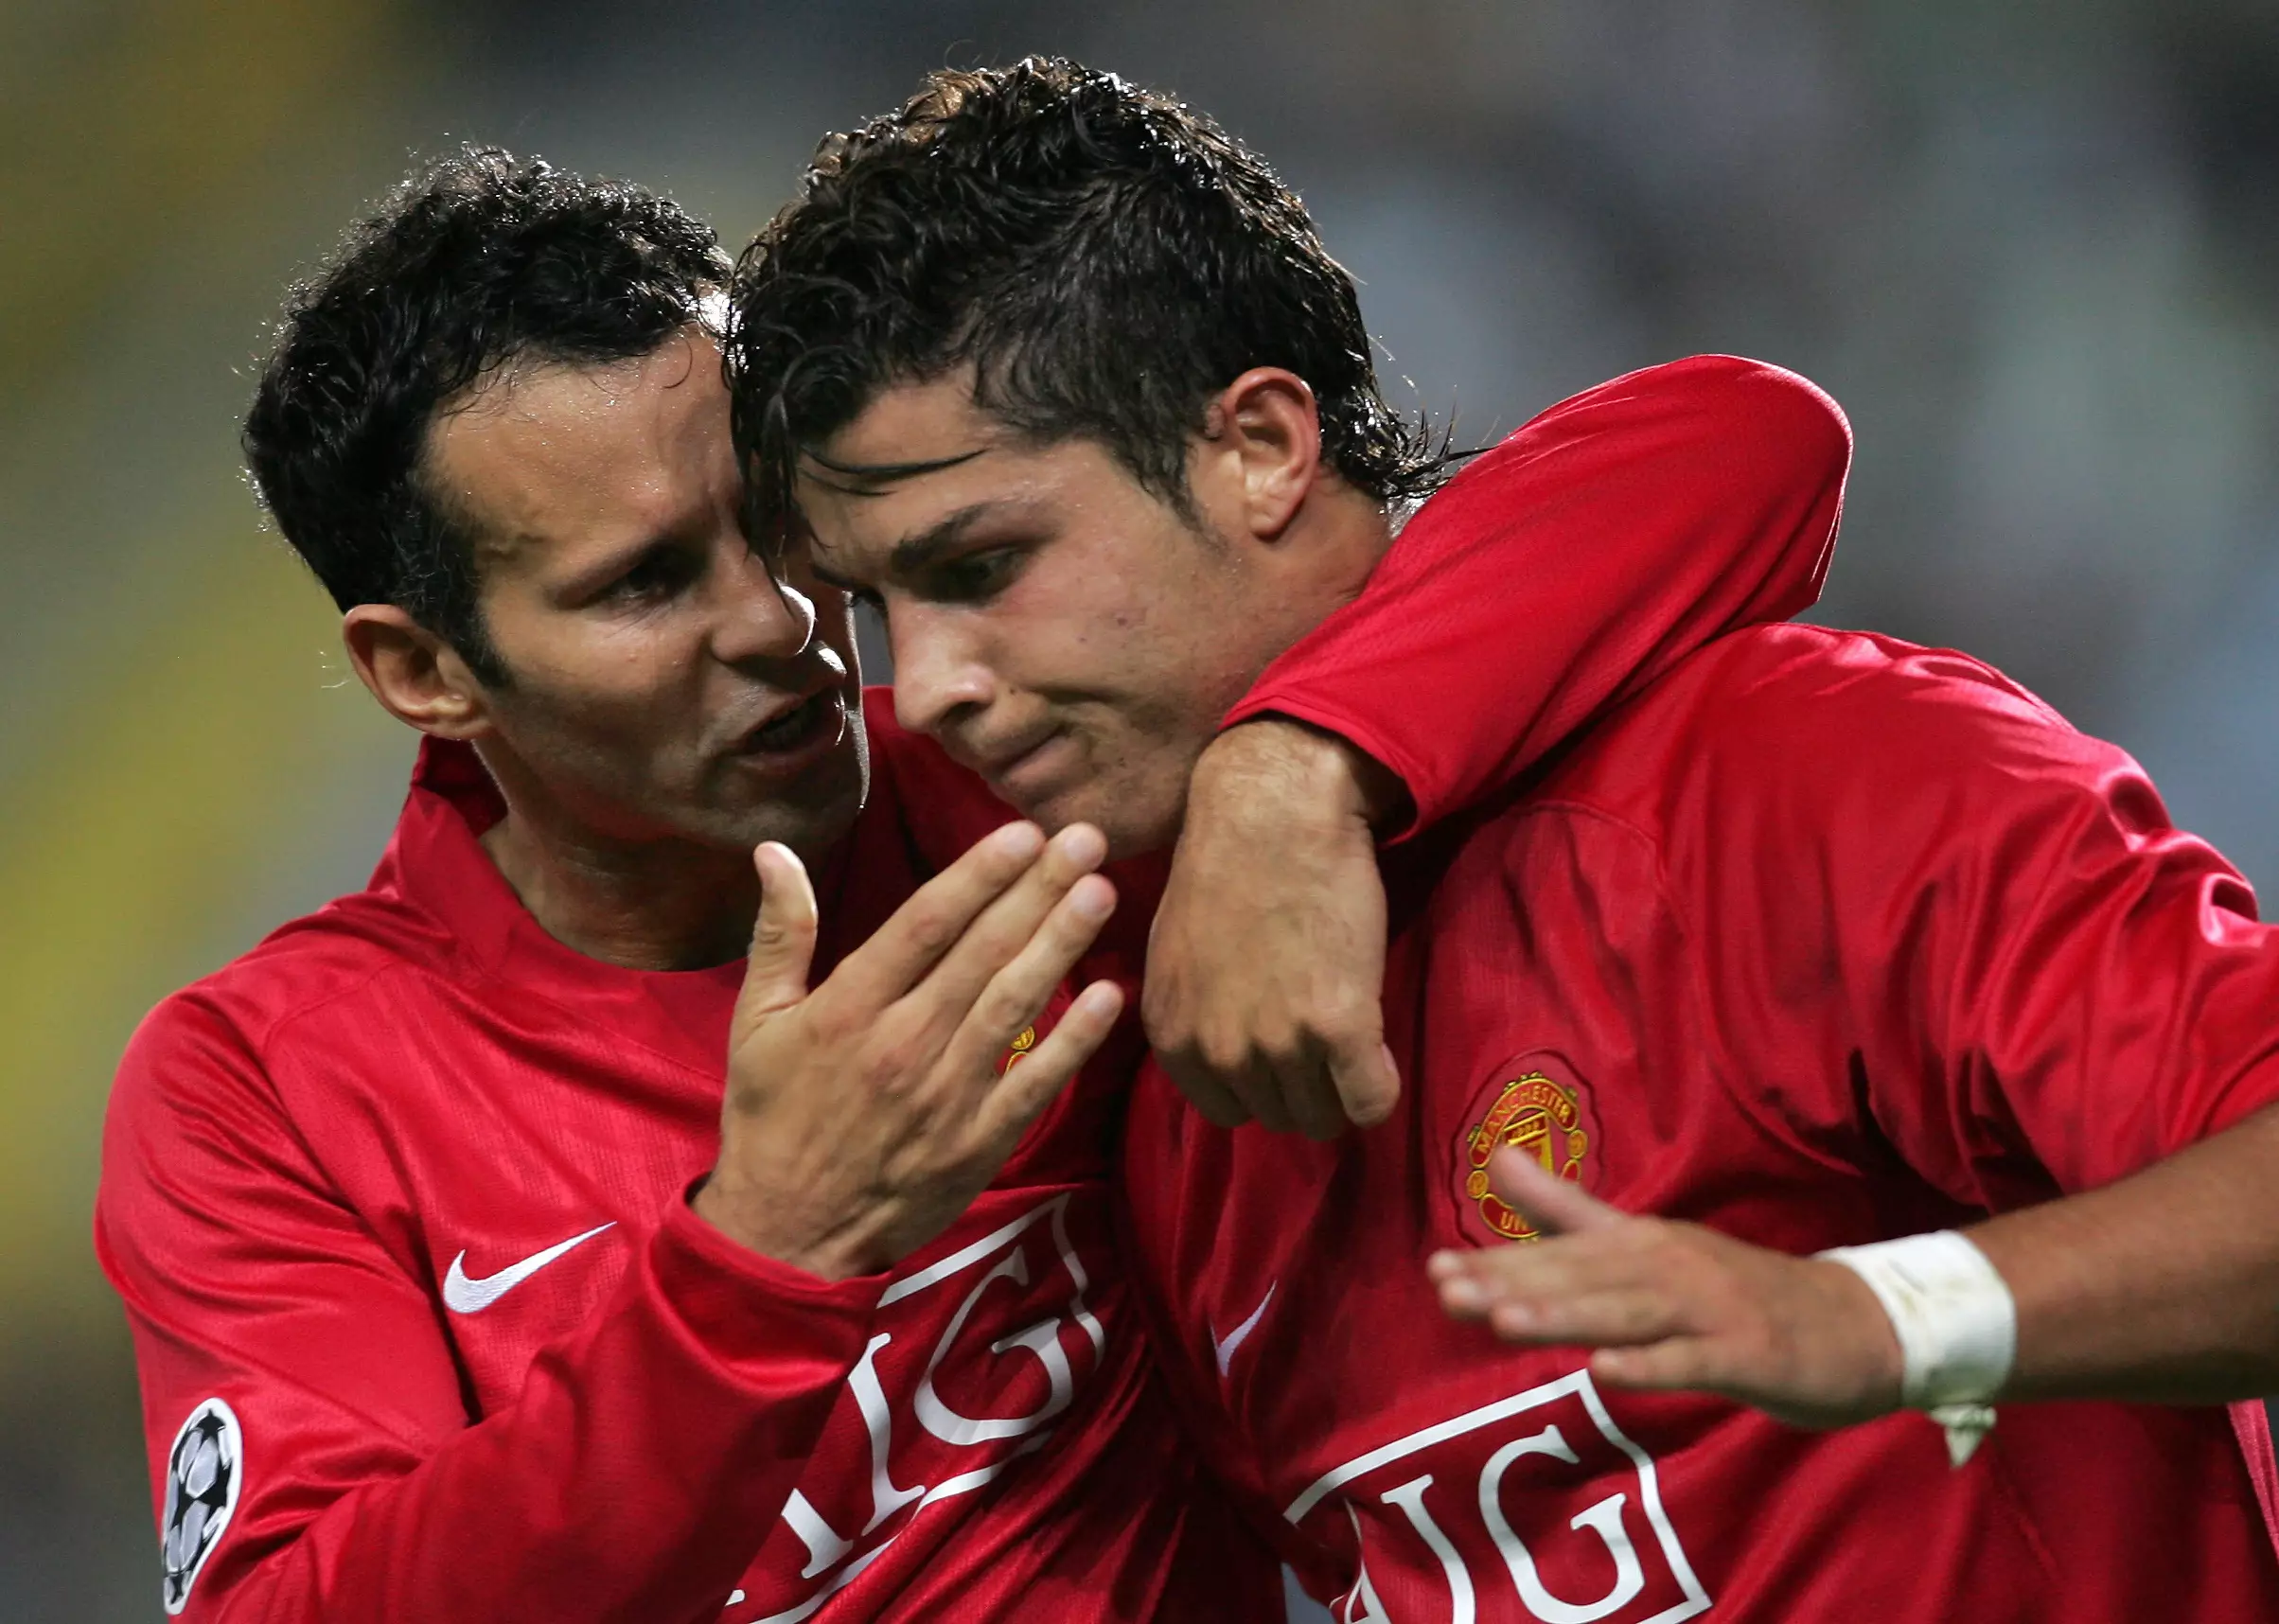 Ryan Giggs Reveals What He First Thought About Cristiano Ronaldo